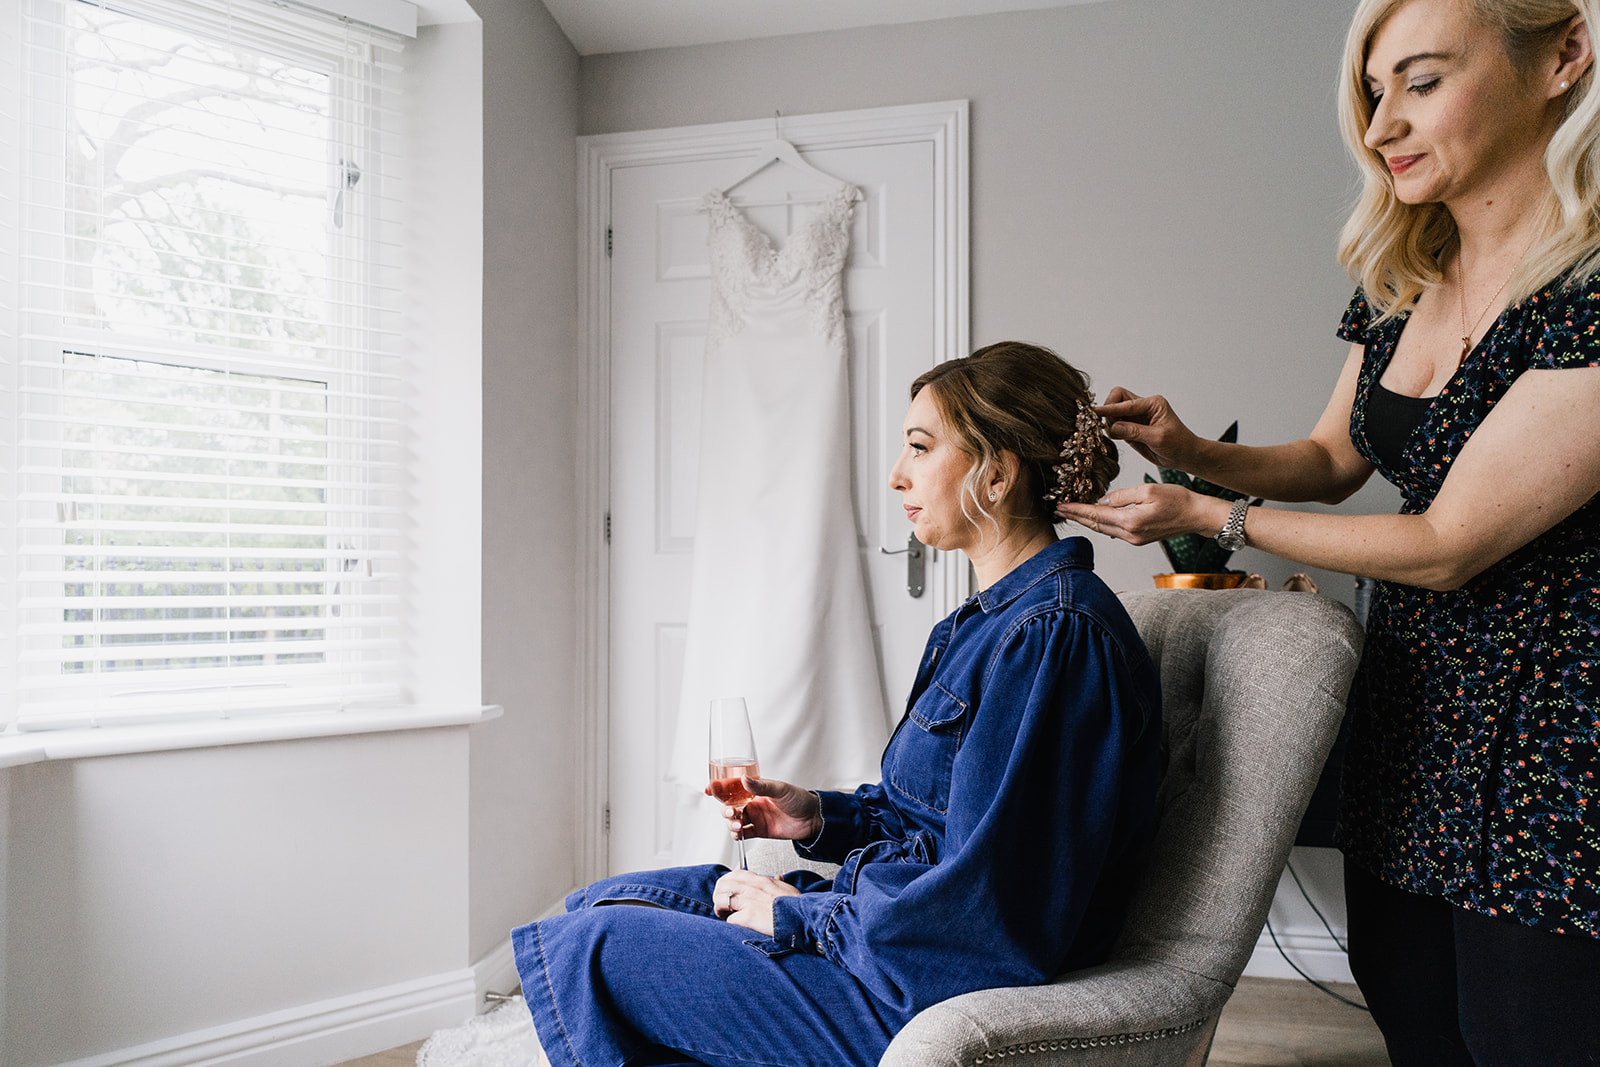 Bride having her hair done in front of wedding dress